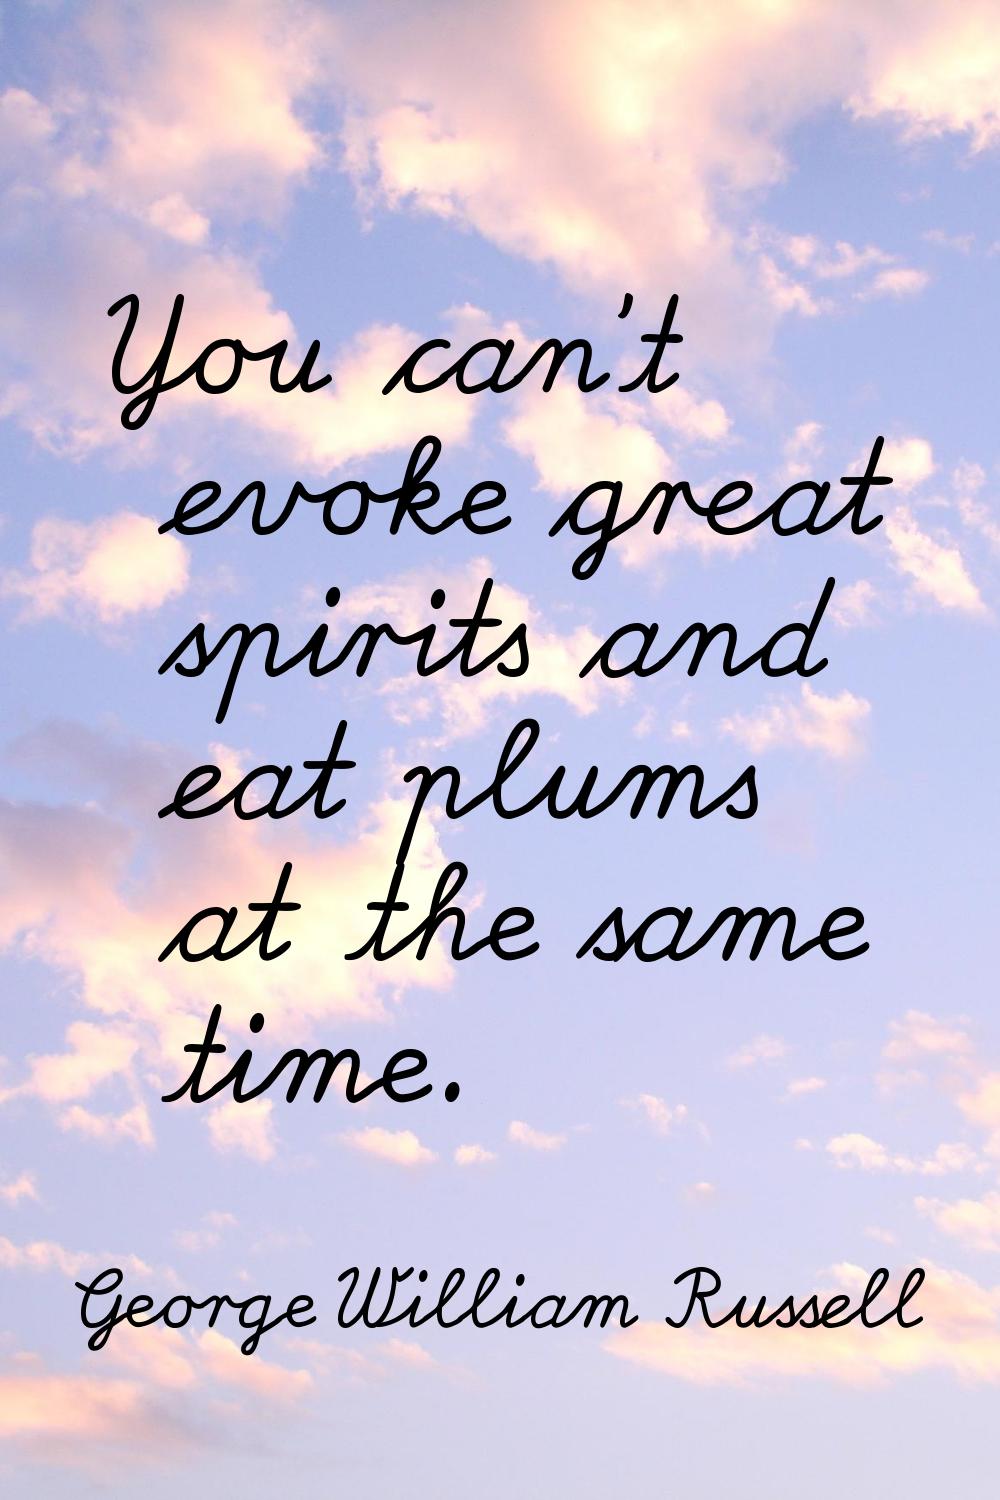 You can't evoke great spirits and eat plums at the same time.